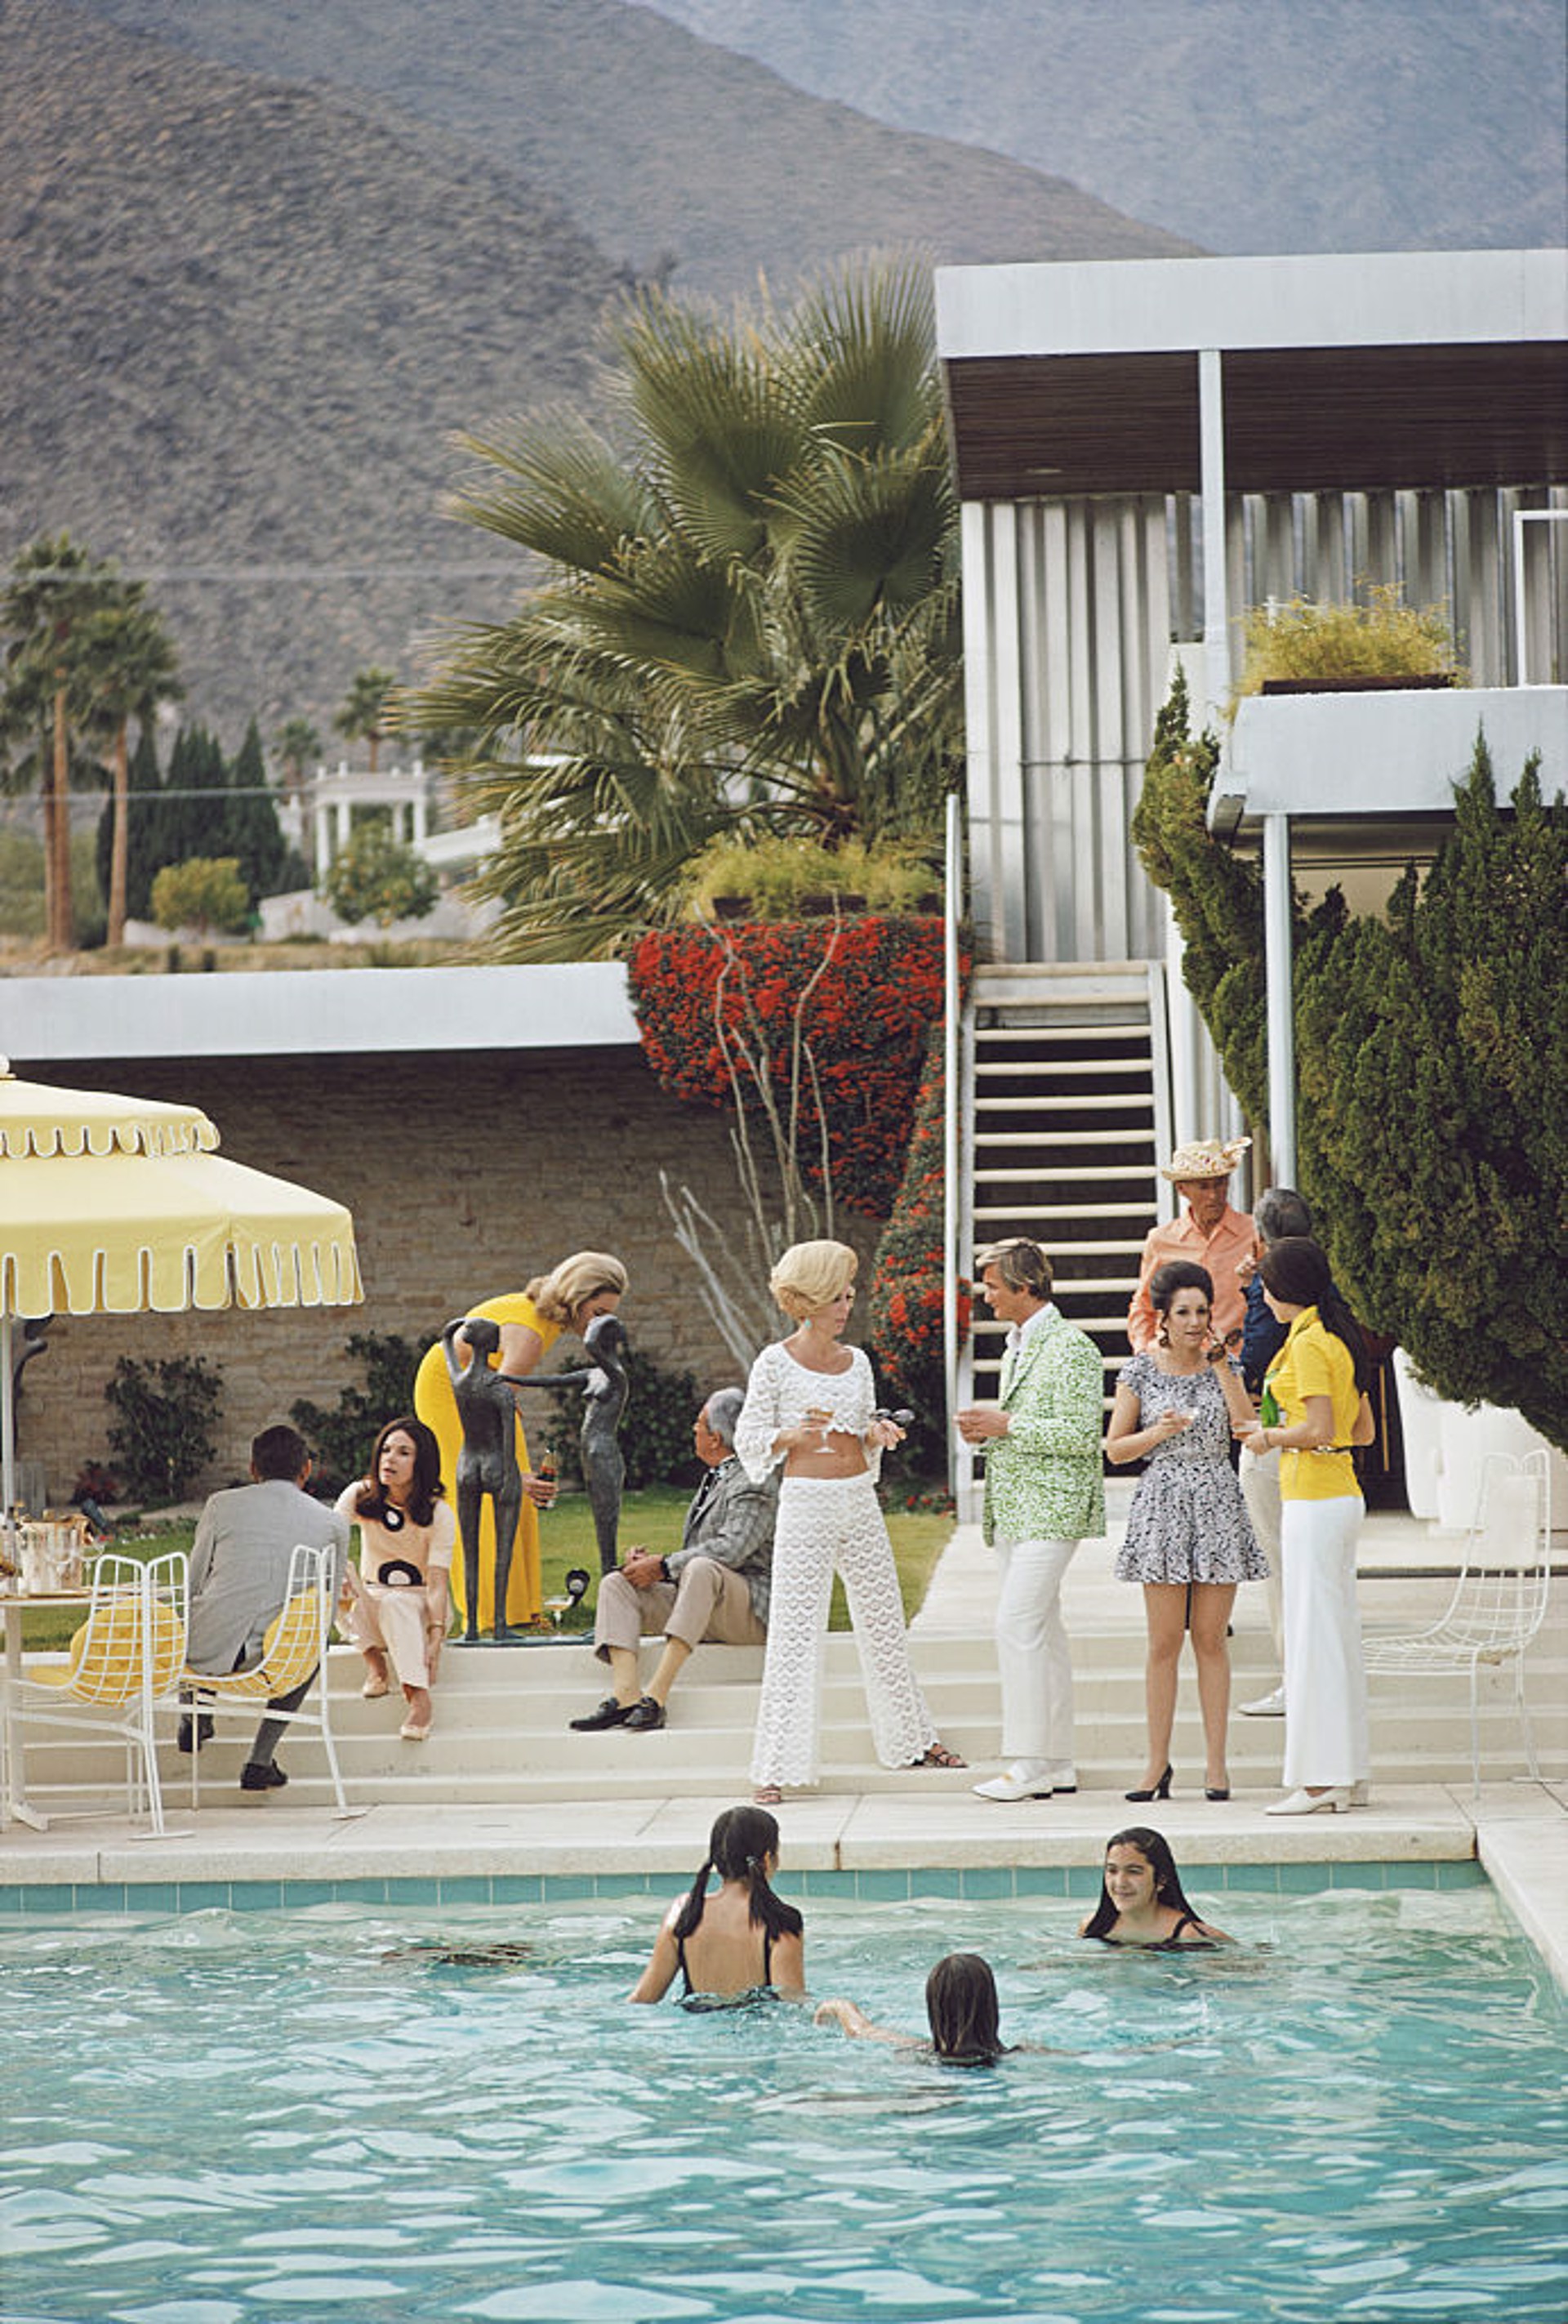 Desert House Party by Slim Aarons